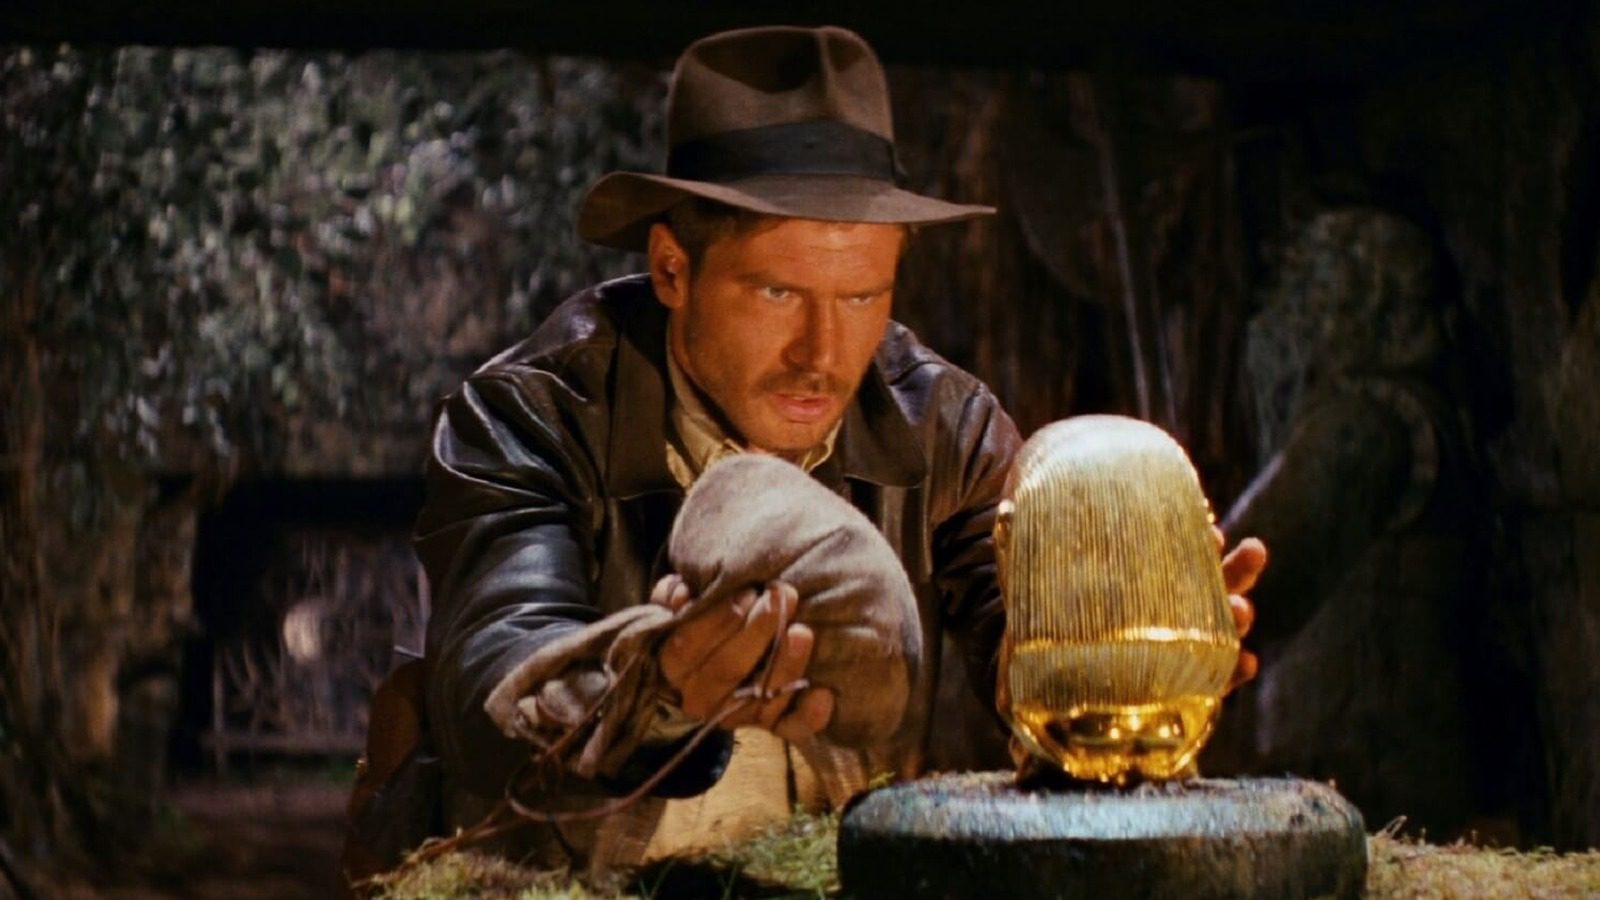 The Absolute Best Indiana Jones Movie According To Fans